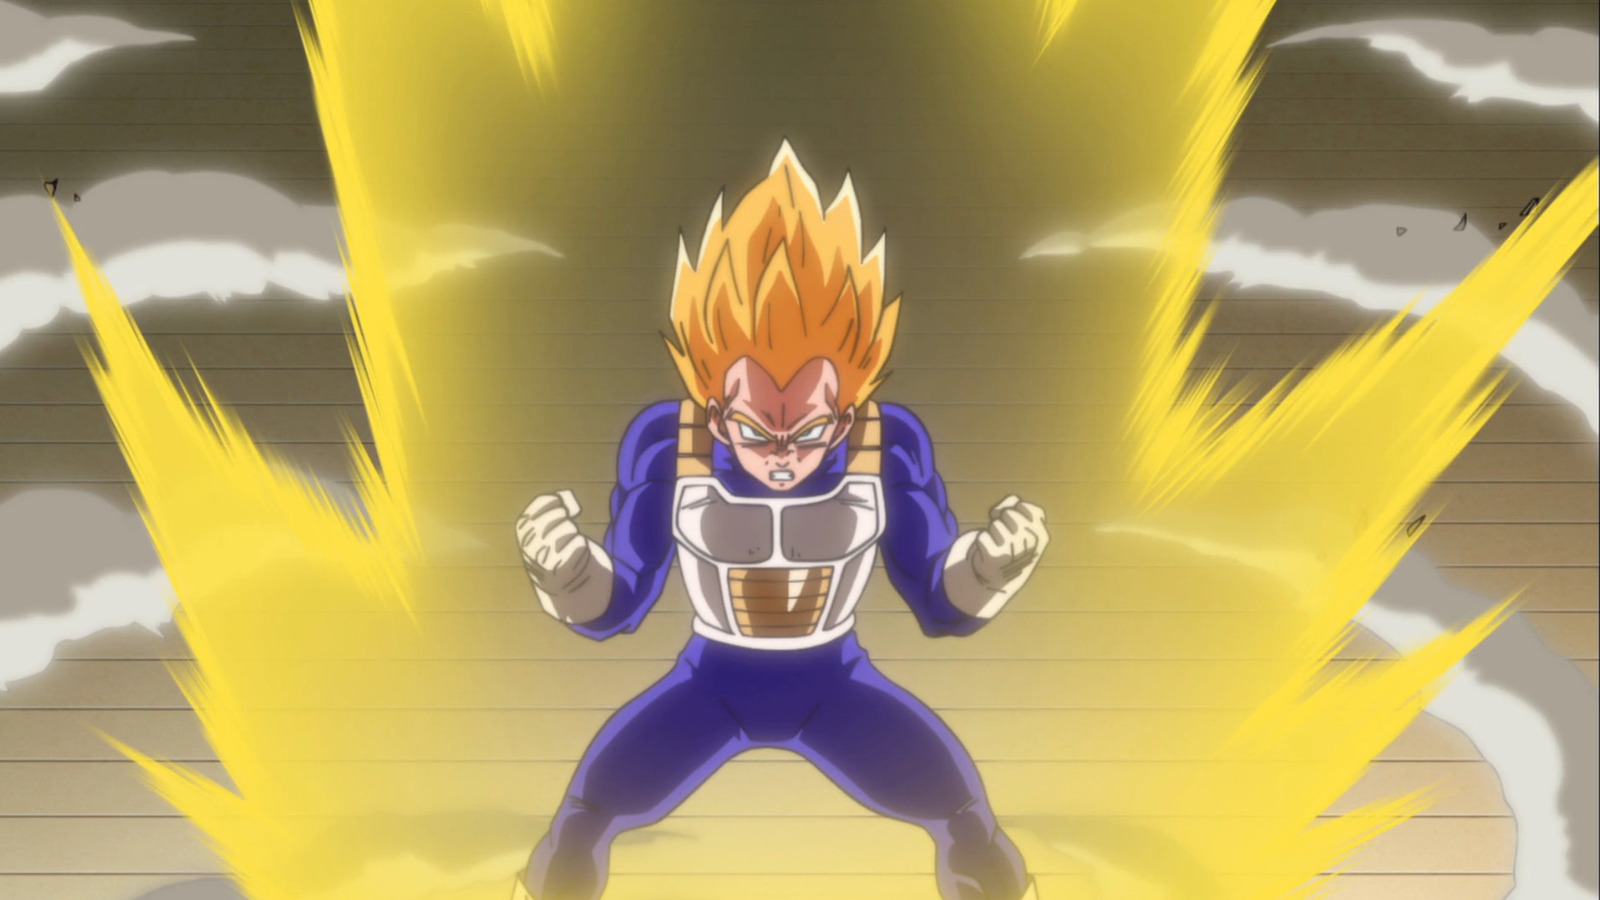 Has anyone talked about the fact that Vegeta is doing the Galick